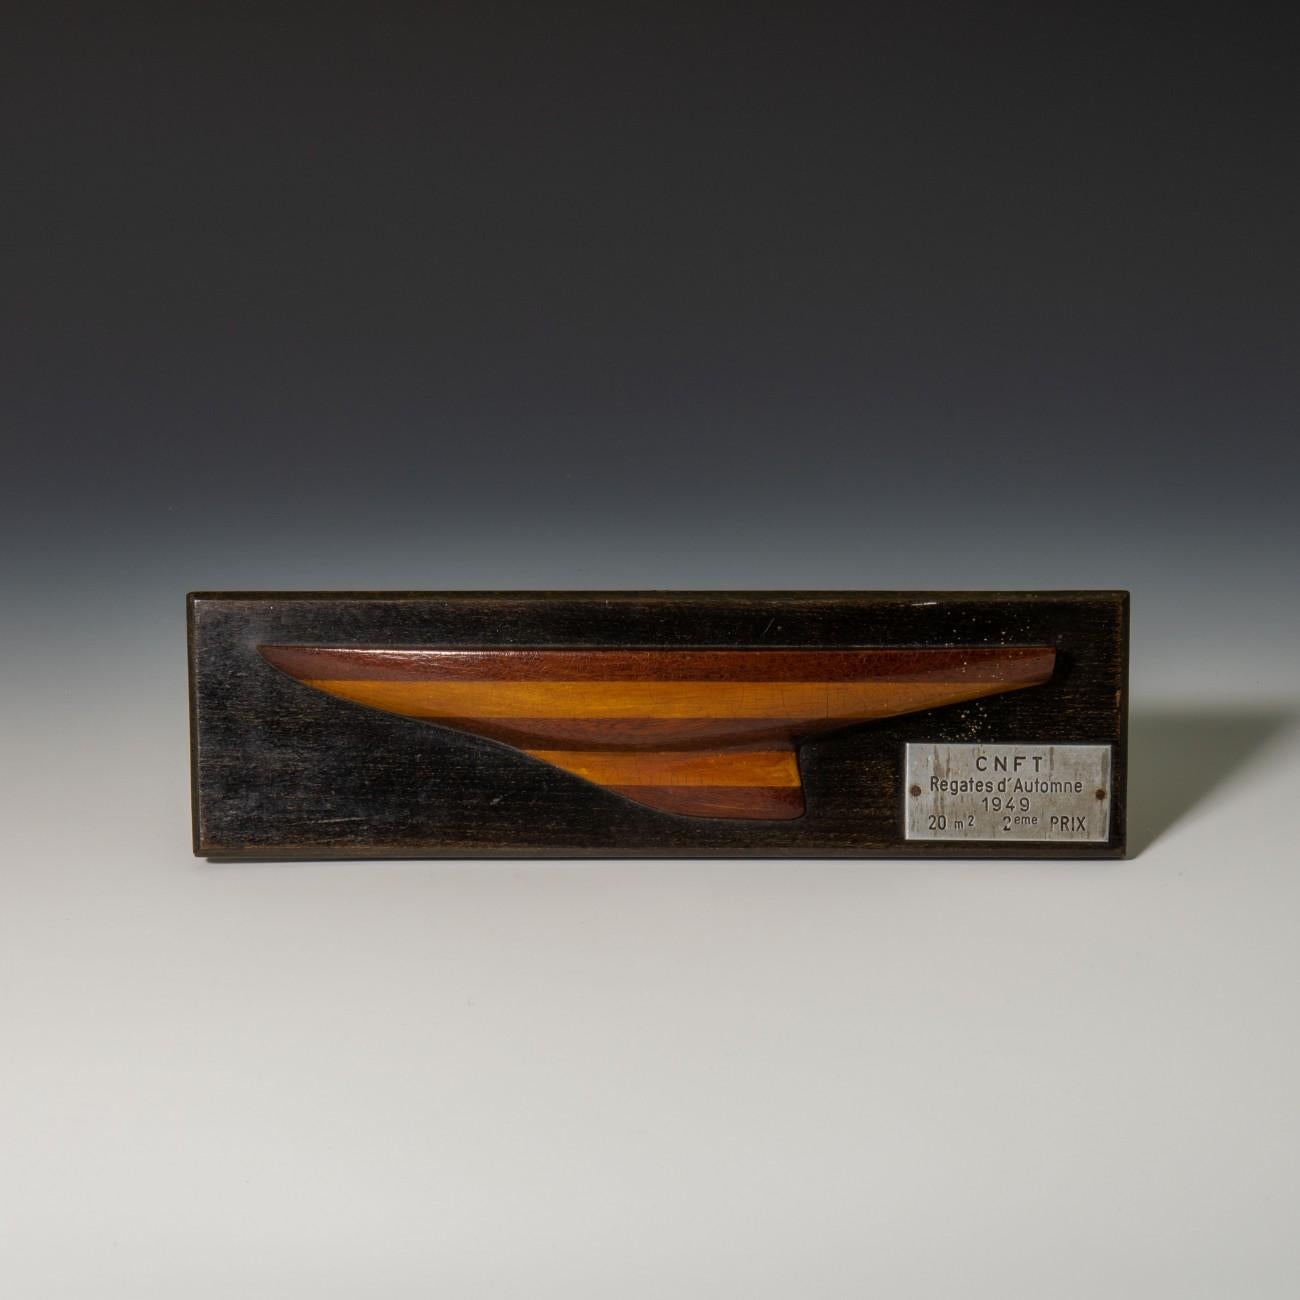 Charming laminated caved wood half hull model, on ebonised back board, dated 1949. The plaque indicates that the model was originally presented as the second prize trophy in a race at the CNFT (Club Nautique de France de Tegel) Regates d’Automne